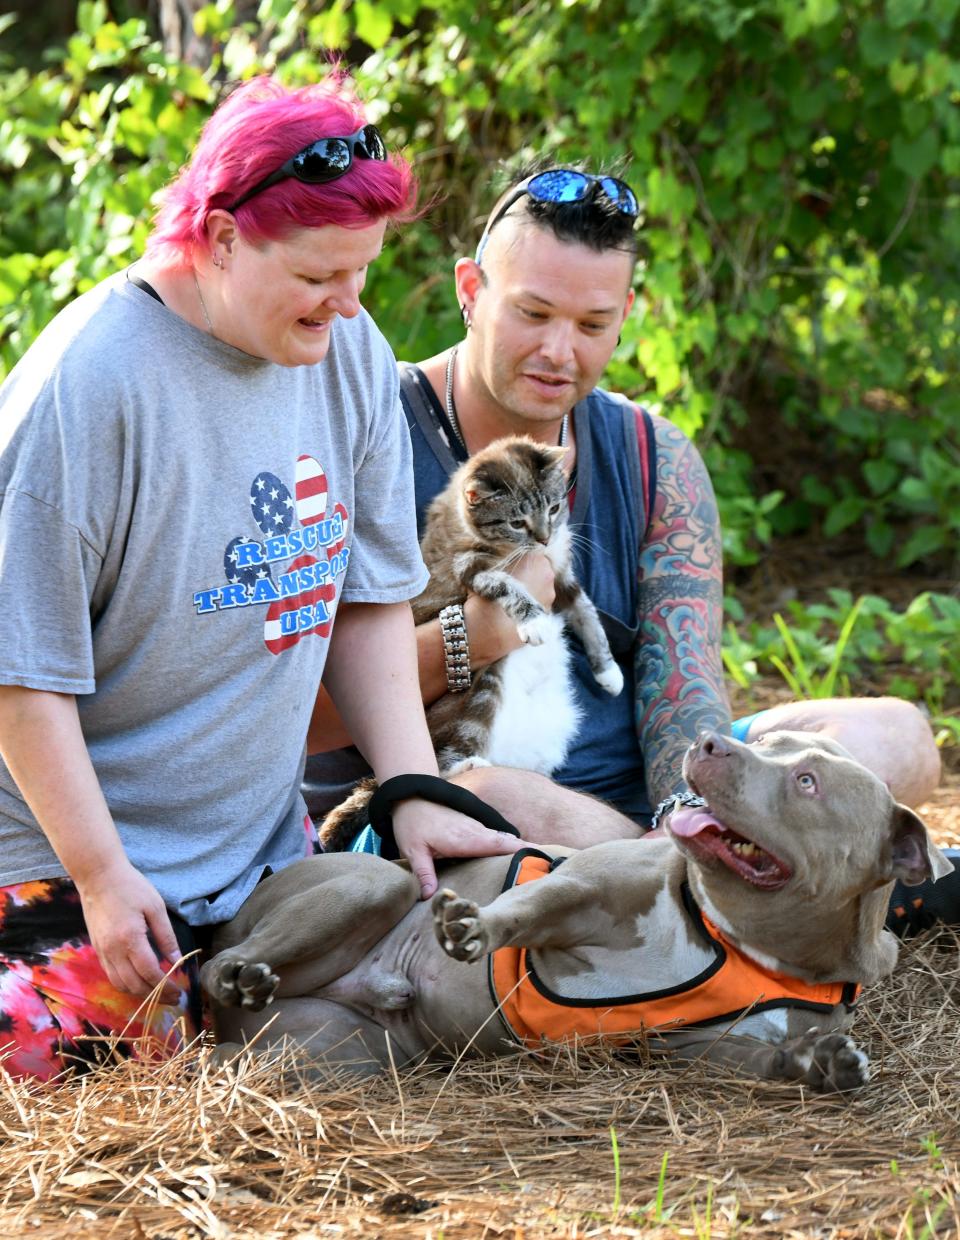 Robyn and Robert Feaganes of CH Lives Matter Rescue Inc., Palm Bay, with two of the several animals they have adopted with cerebellar hypoplasia, a brain condition that can lead to a loss in coordination and balance. Tank the Trainwreck is a humorous and sweet- natured red nose pitbull, and Billy Bobble Thornton is a cuddly cat who patiently poses for photos. For more info on their animal rescue, visit www.chlivesmatterrescue.com.